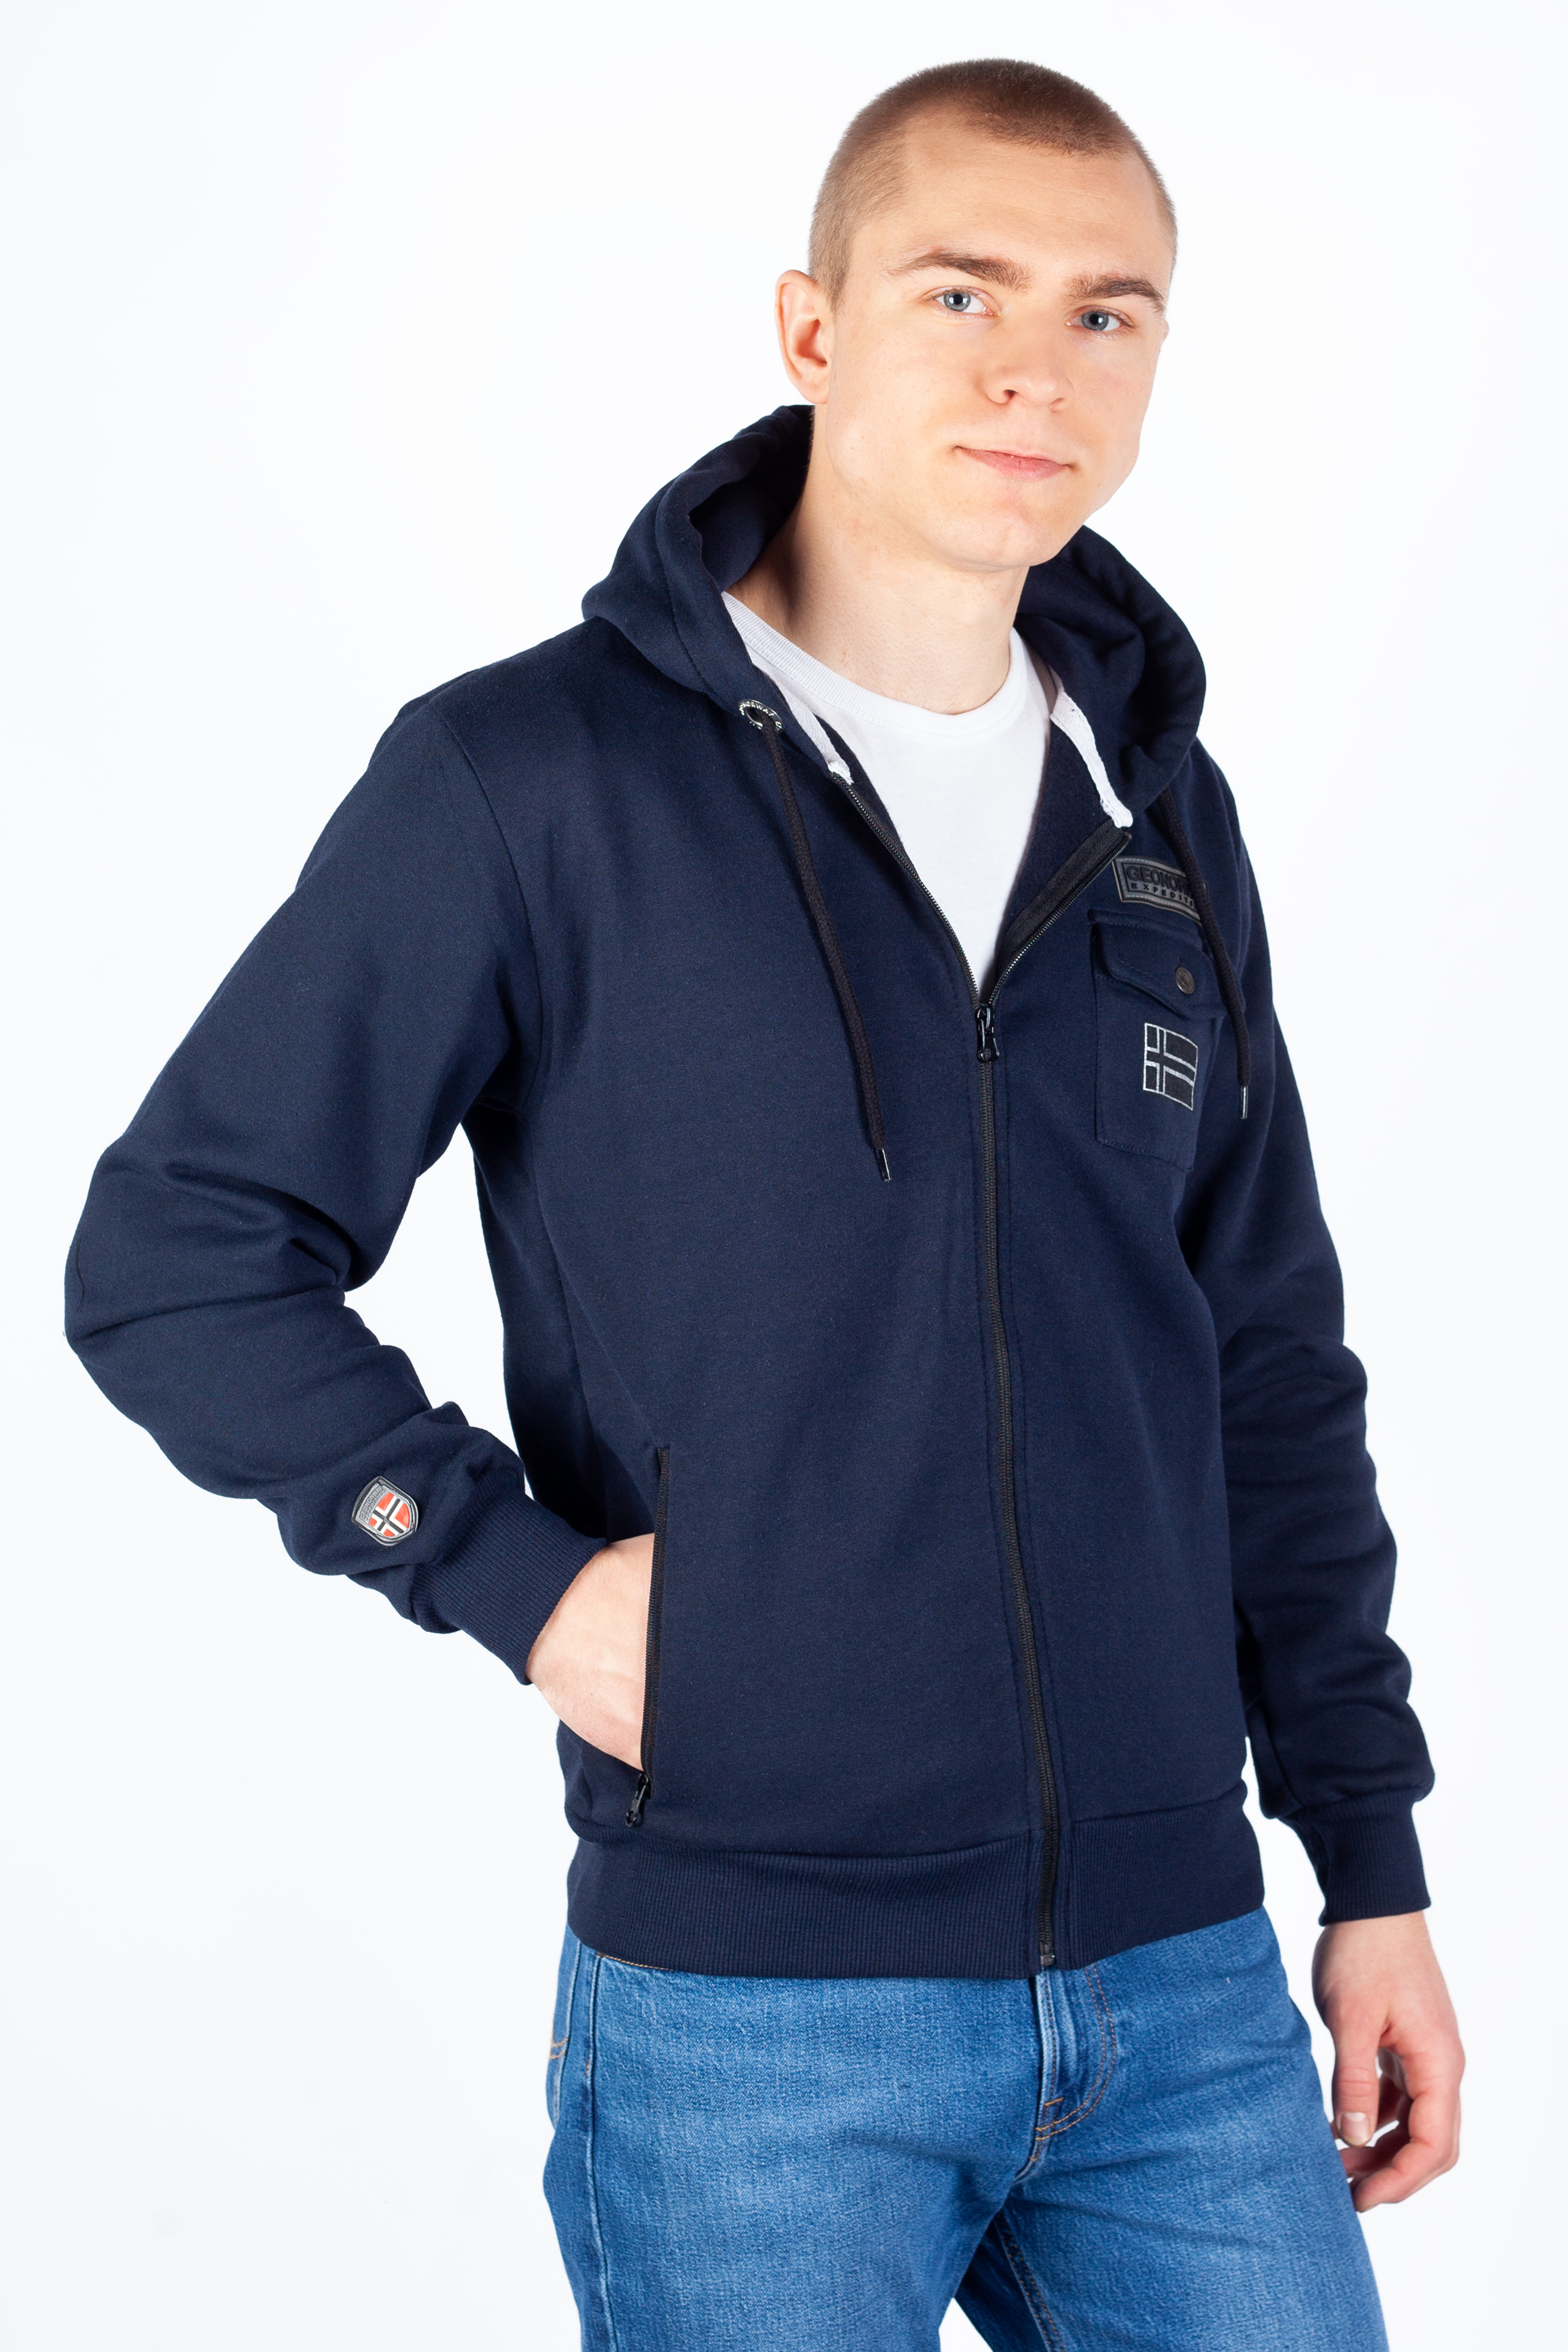 Spordijakid GEOGRAPHICAL NORWAY GUESSY-Navy